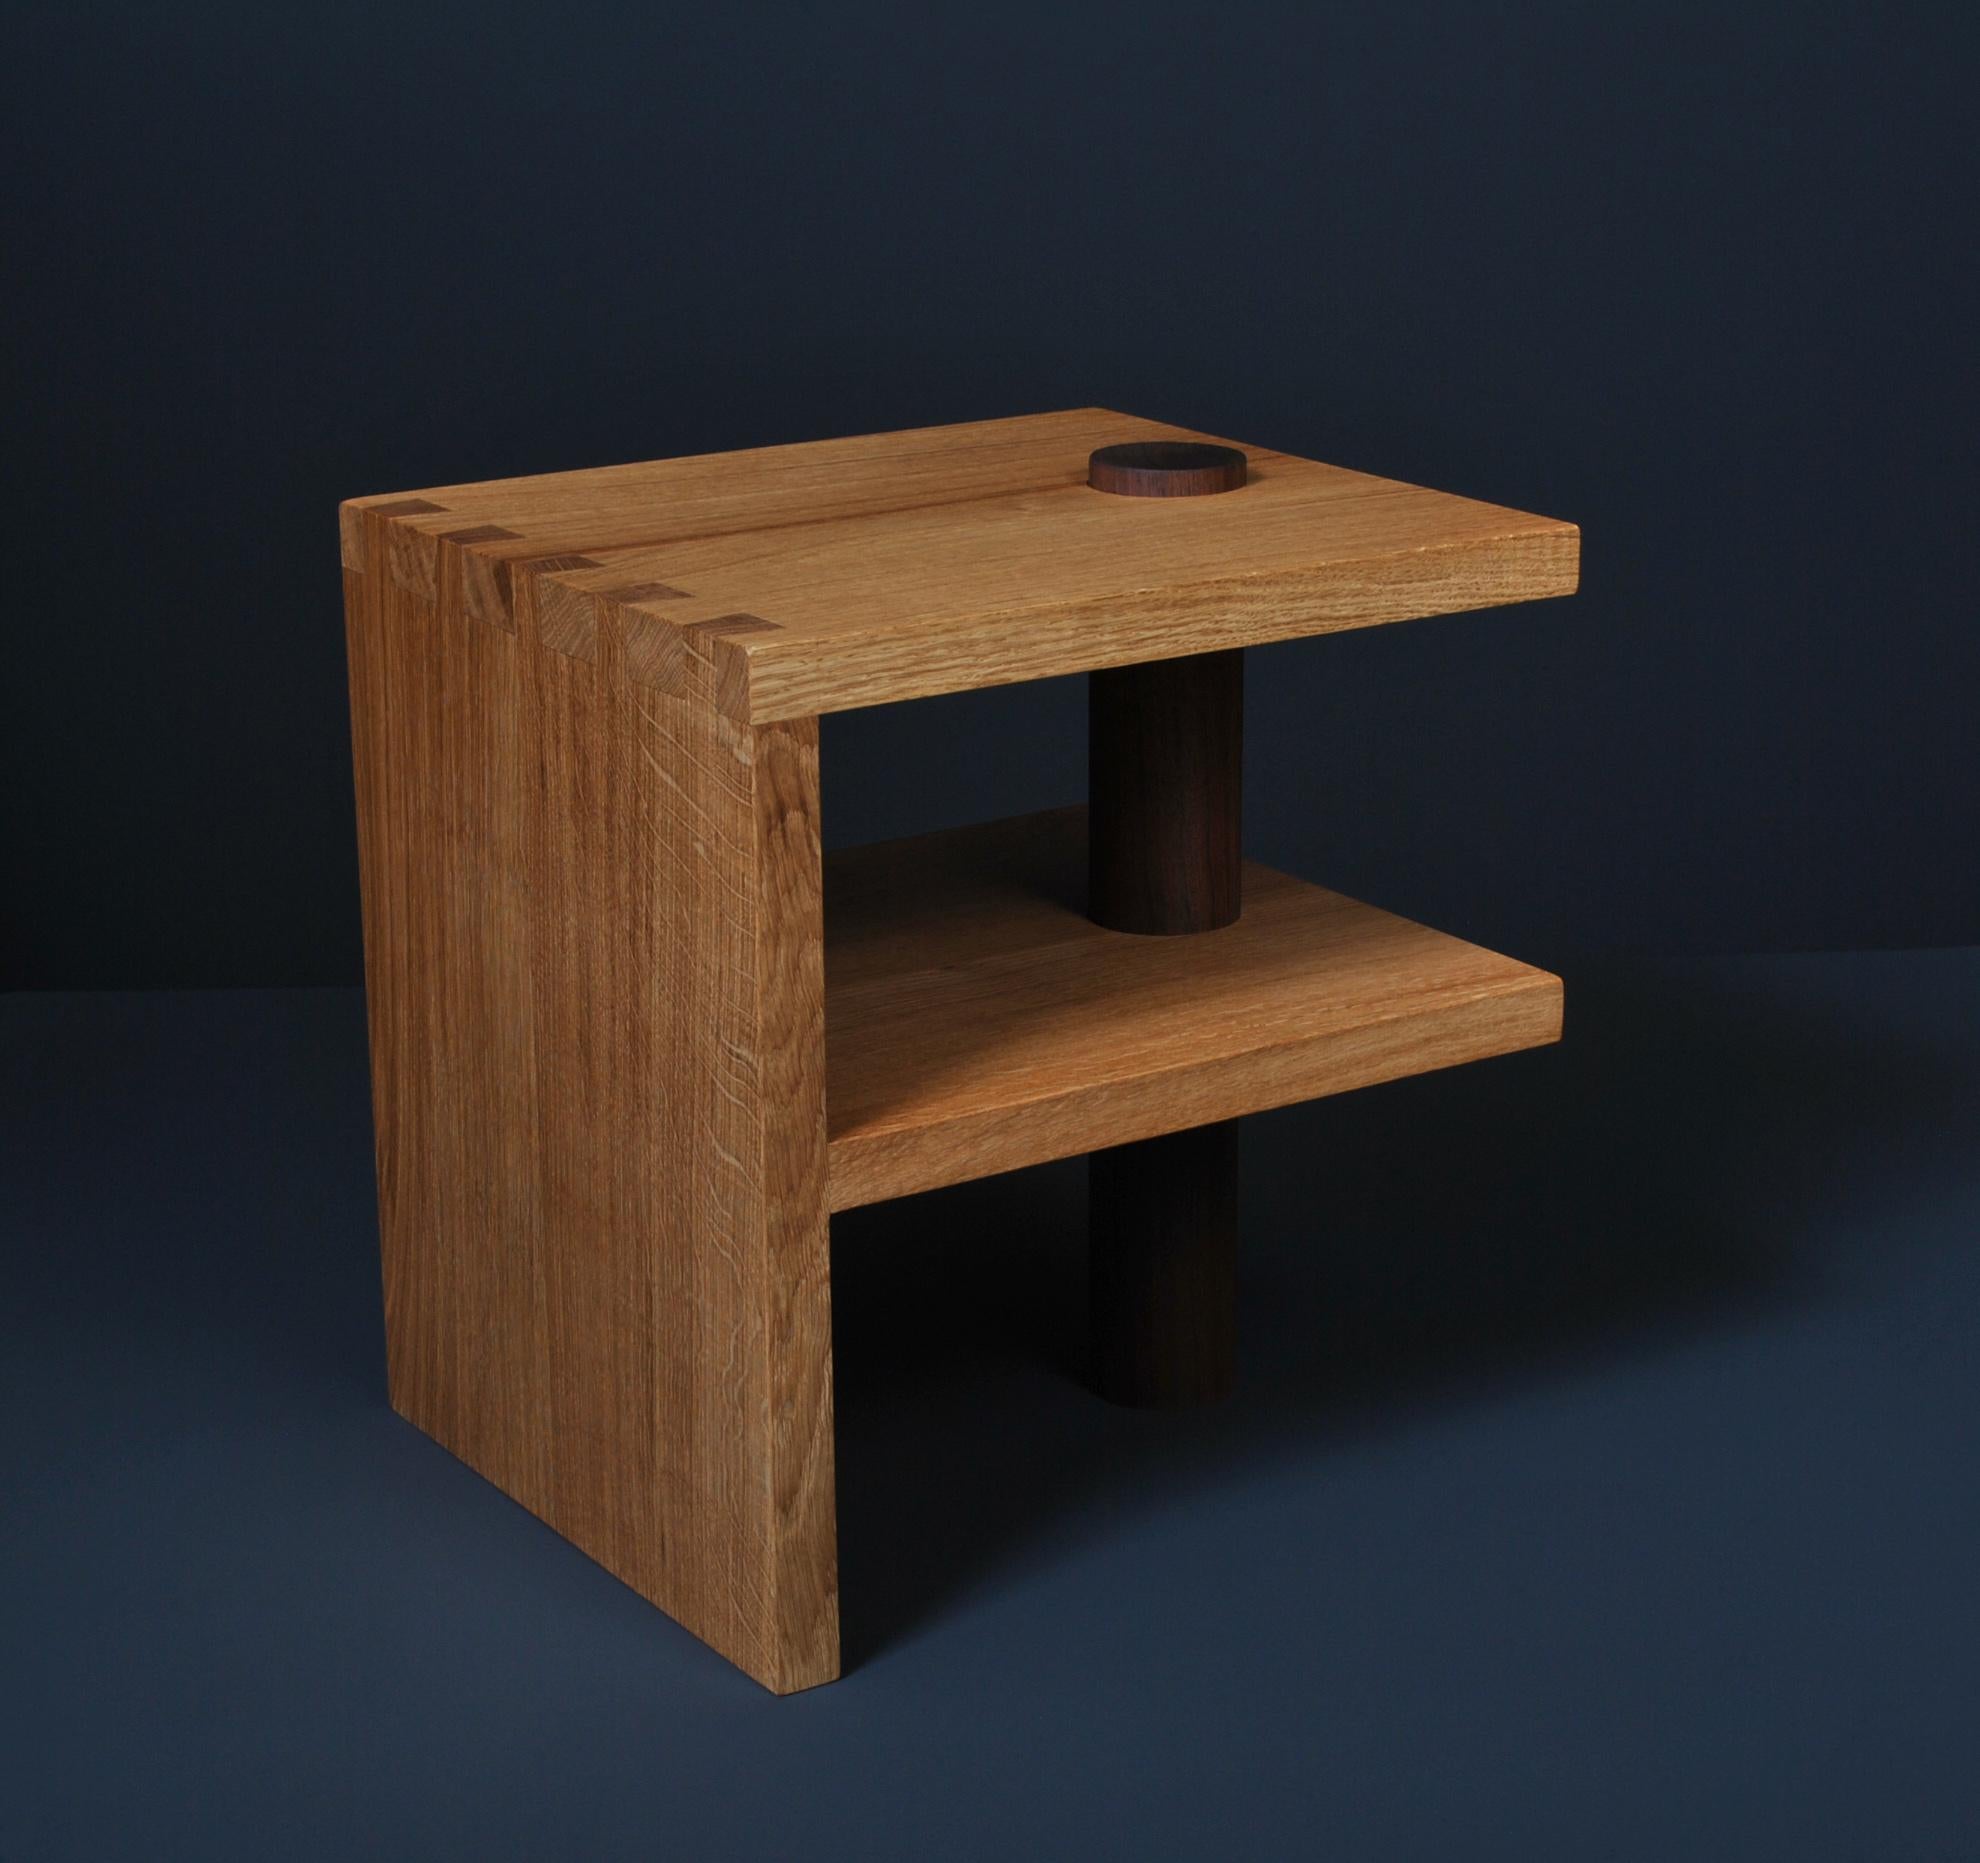 Architectural postmodern oak & walnut pillar end or side table. Designed by SUM furniture and handcrafted using traditional techniques from fully quartersawn English oak and American Walnut. Hand-cut large dovetail jointing with turned walnut